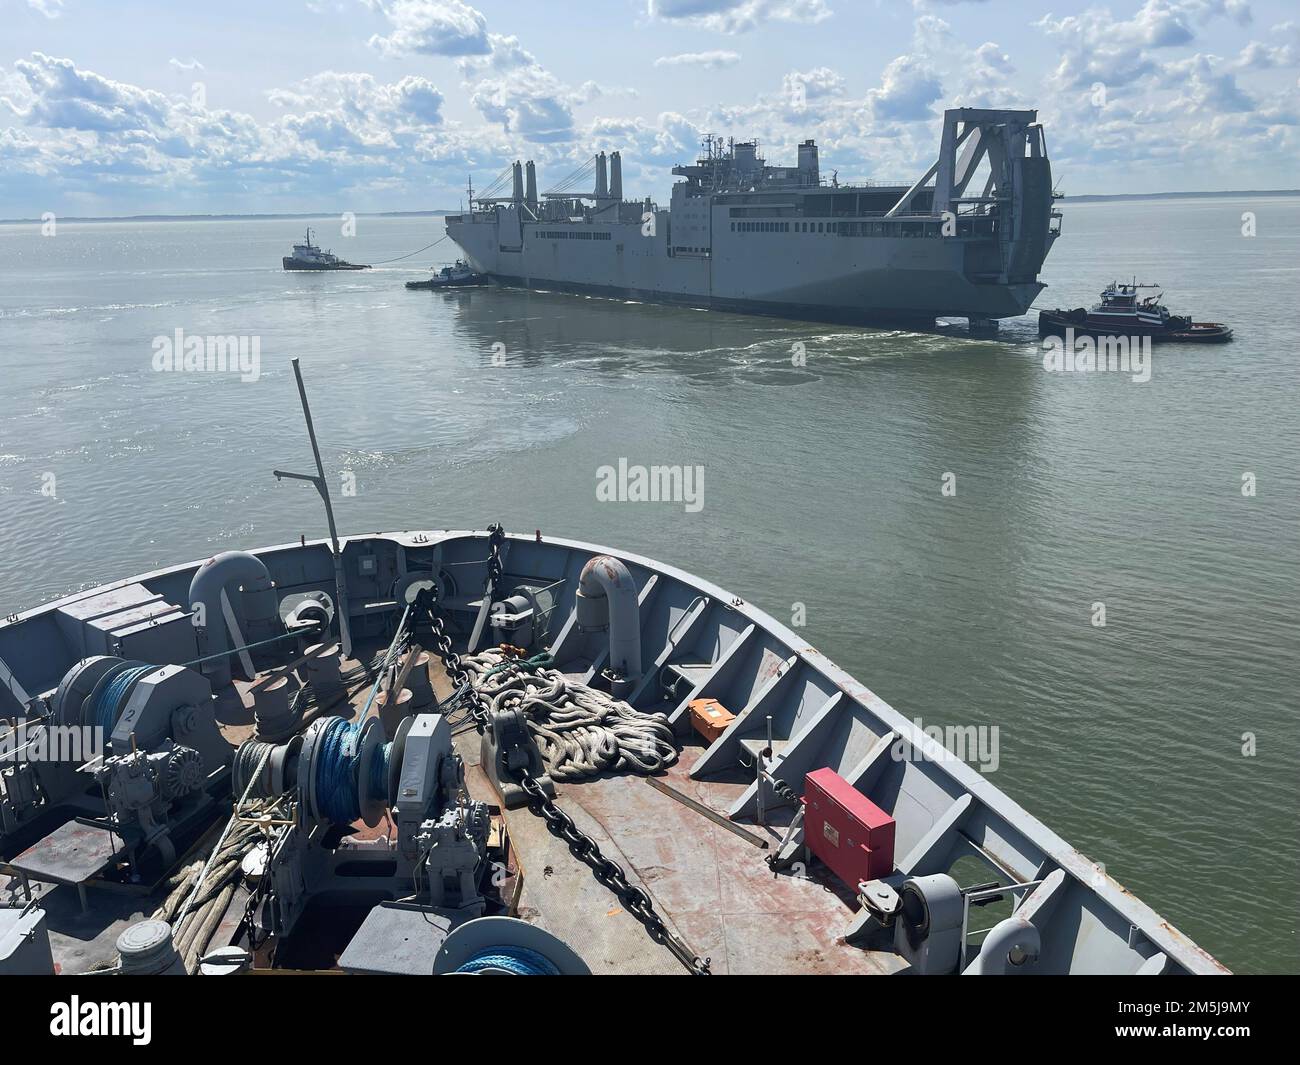 NORFOLK, Va. (Apr. 11, 2022) Military Sealift Command in March chartered tugboat Signet Warhorse I to tow Large, Medium-Speed, Roll-on/Roll-off (LMSR) ship USNS Shughart (T-AKR 295) from Newport News Marine Terminal to Maritime Administration Reserve Fleet in Beaumont, Texas, where the vessel will permanently join MARAD’s Ready Reserve Force (RRF). Stock Photo